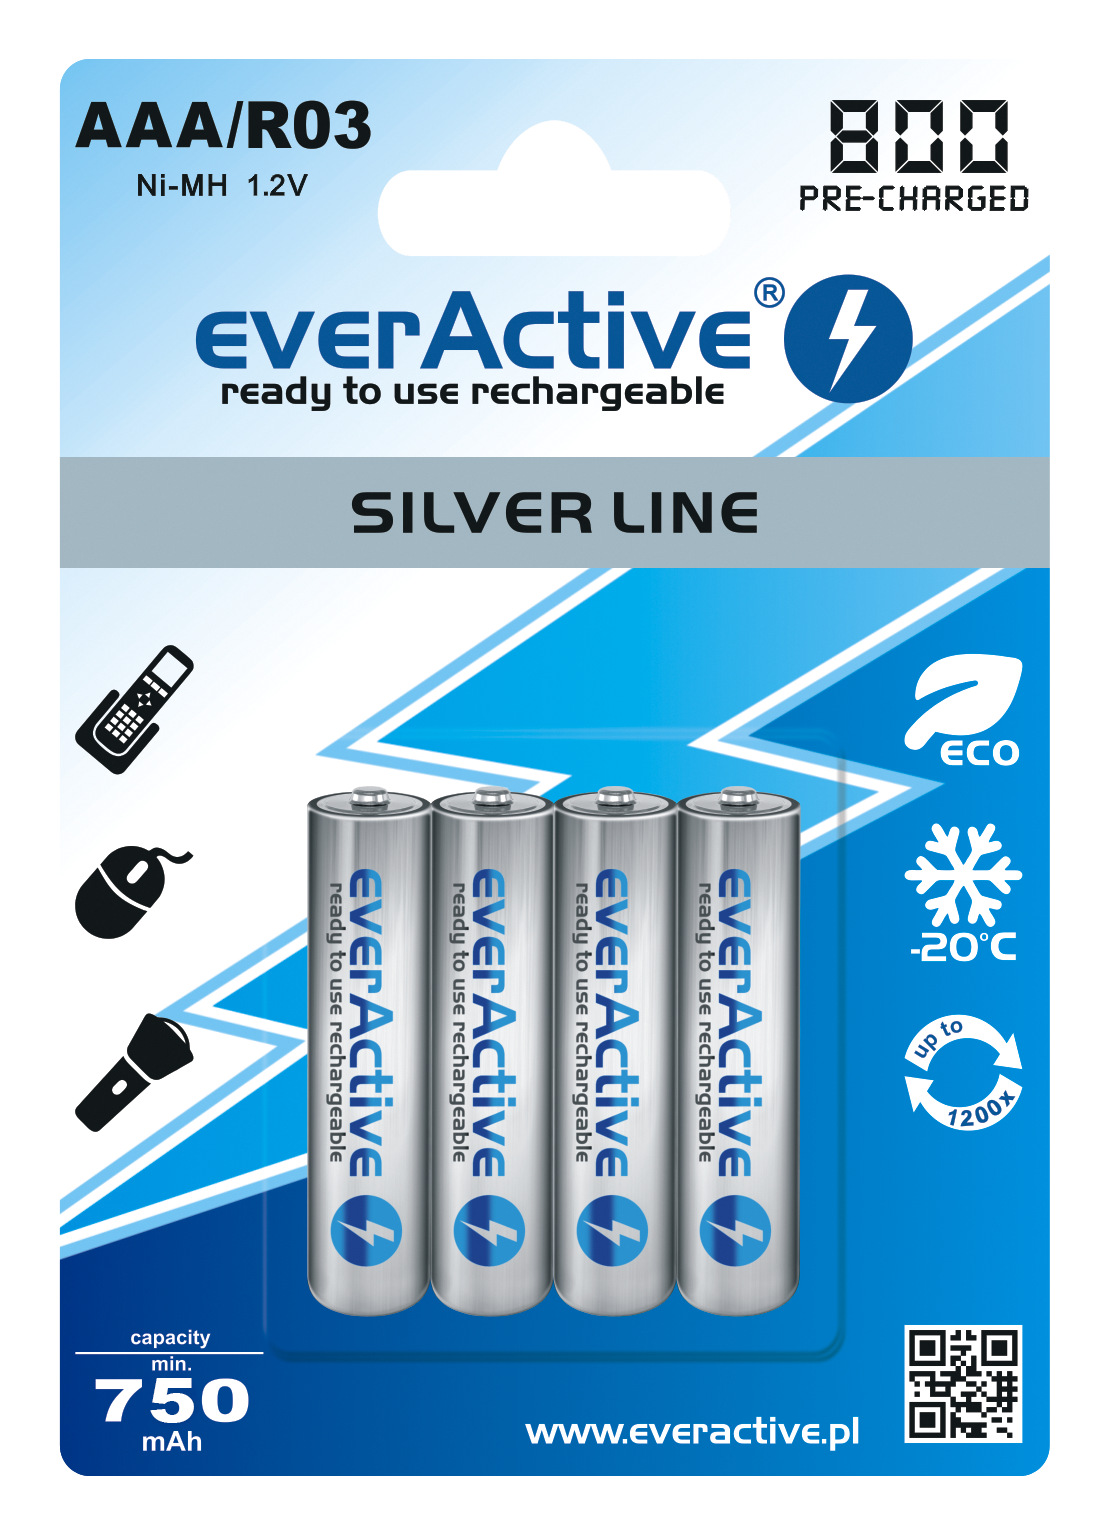 increased capacity of AAA silver line rechargeable batteries